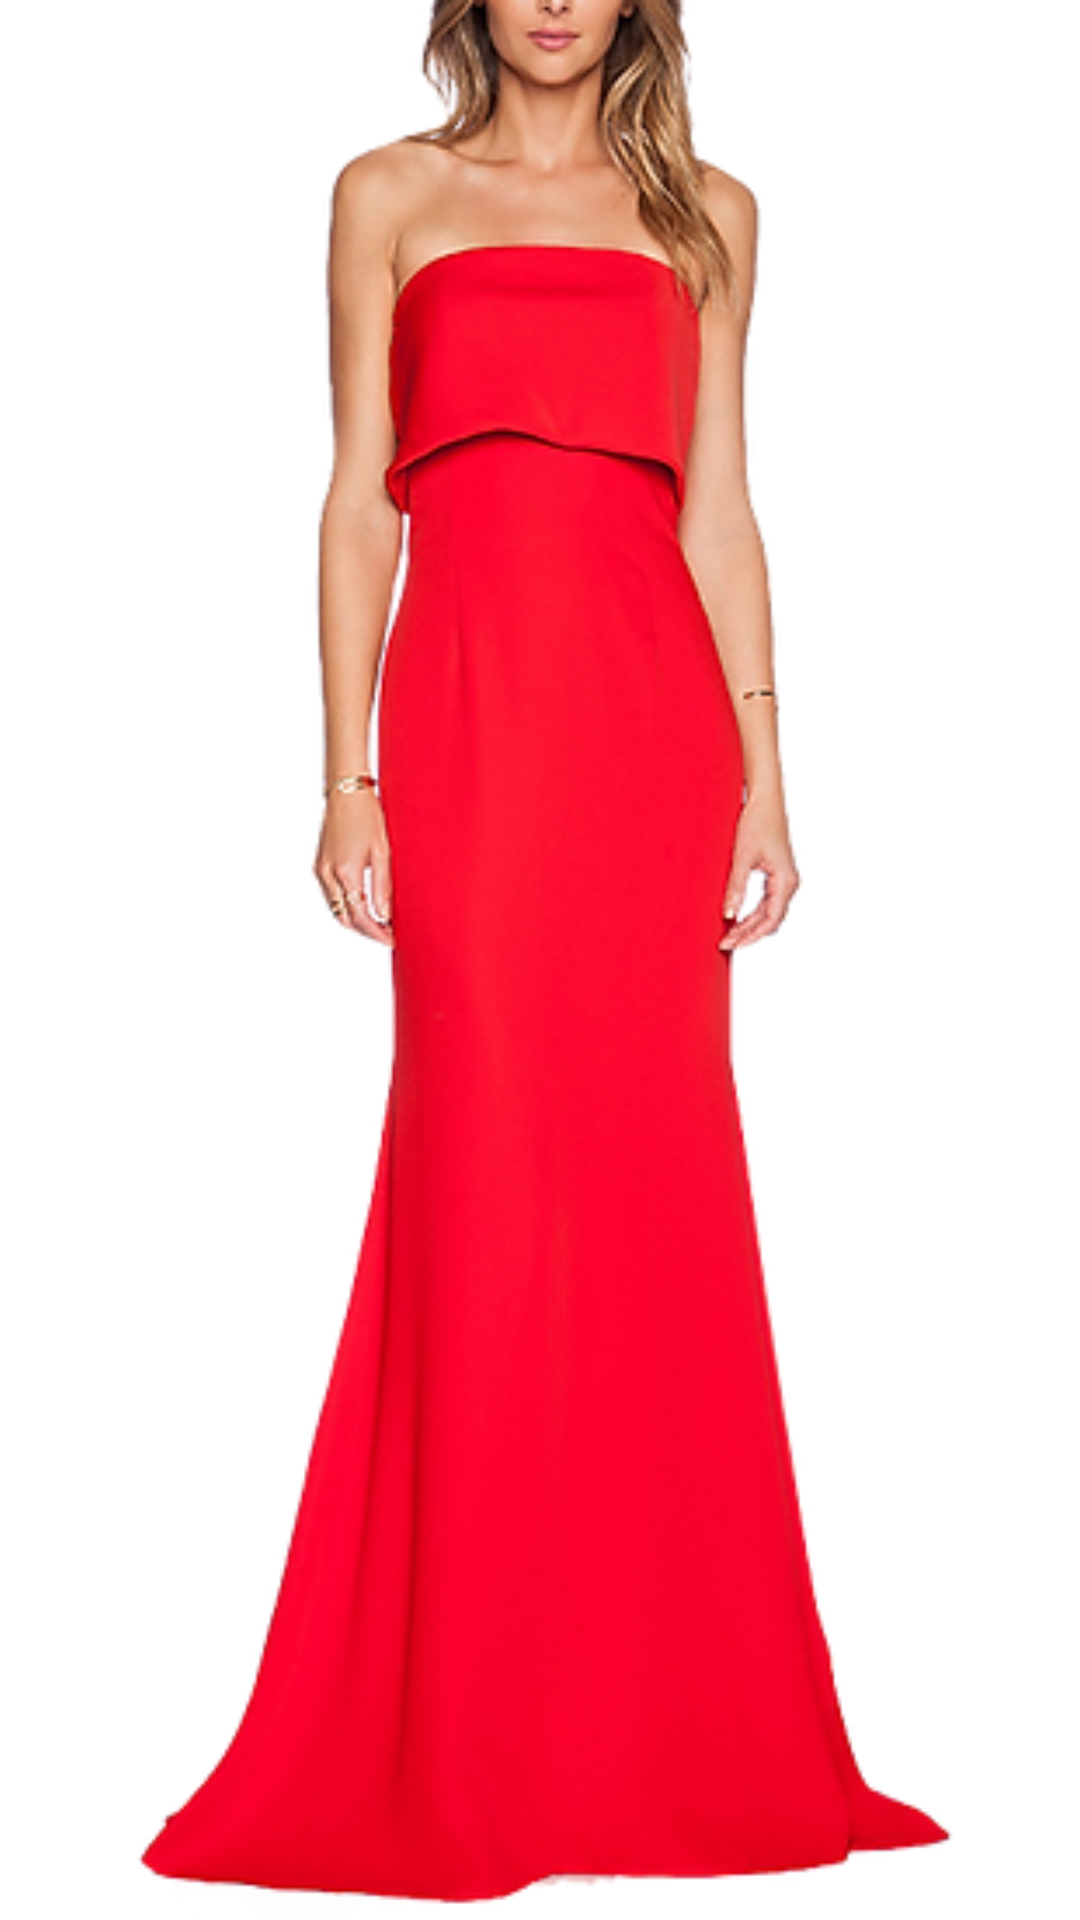 Jarlo London Grace Layered Bustier Gown in Red